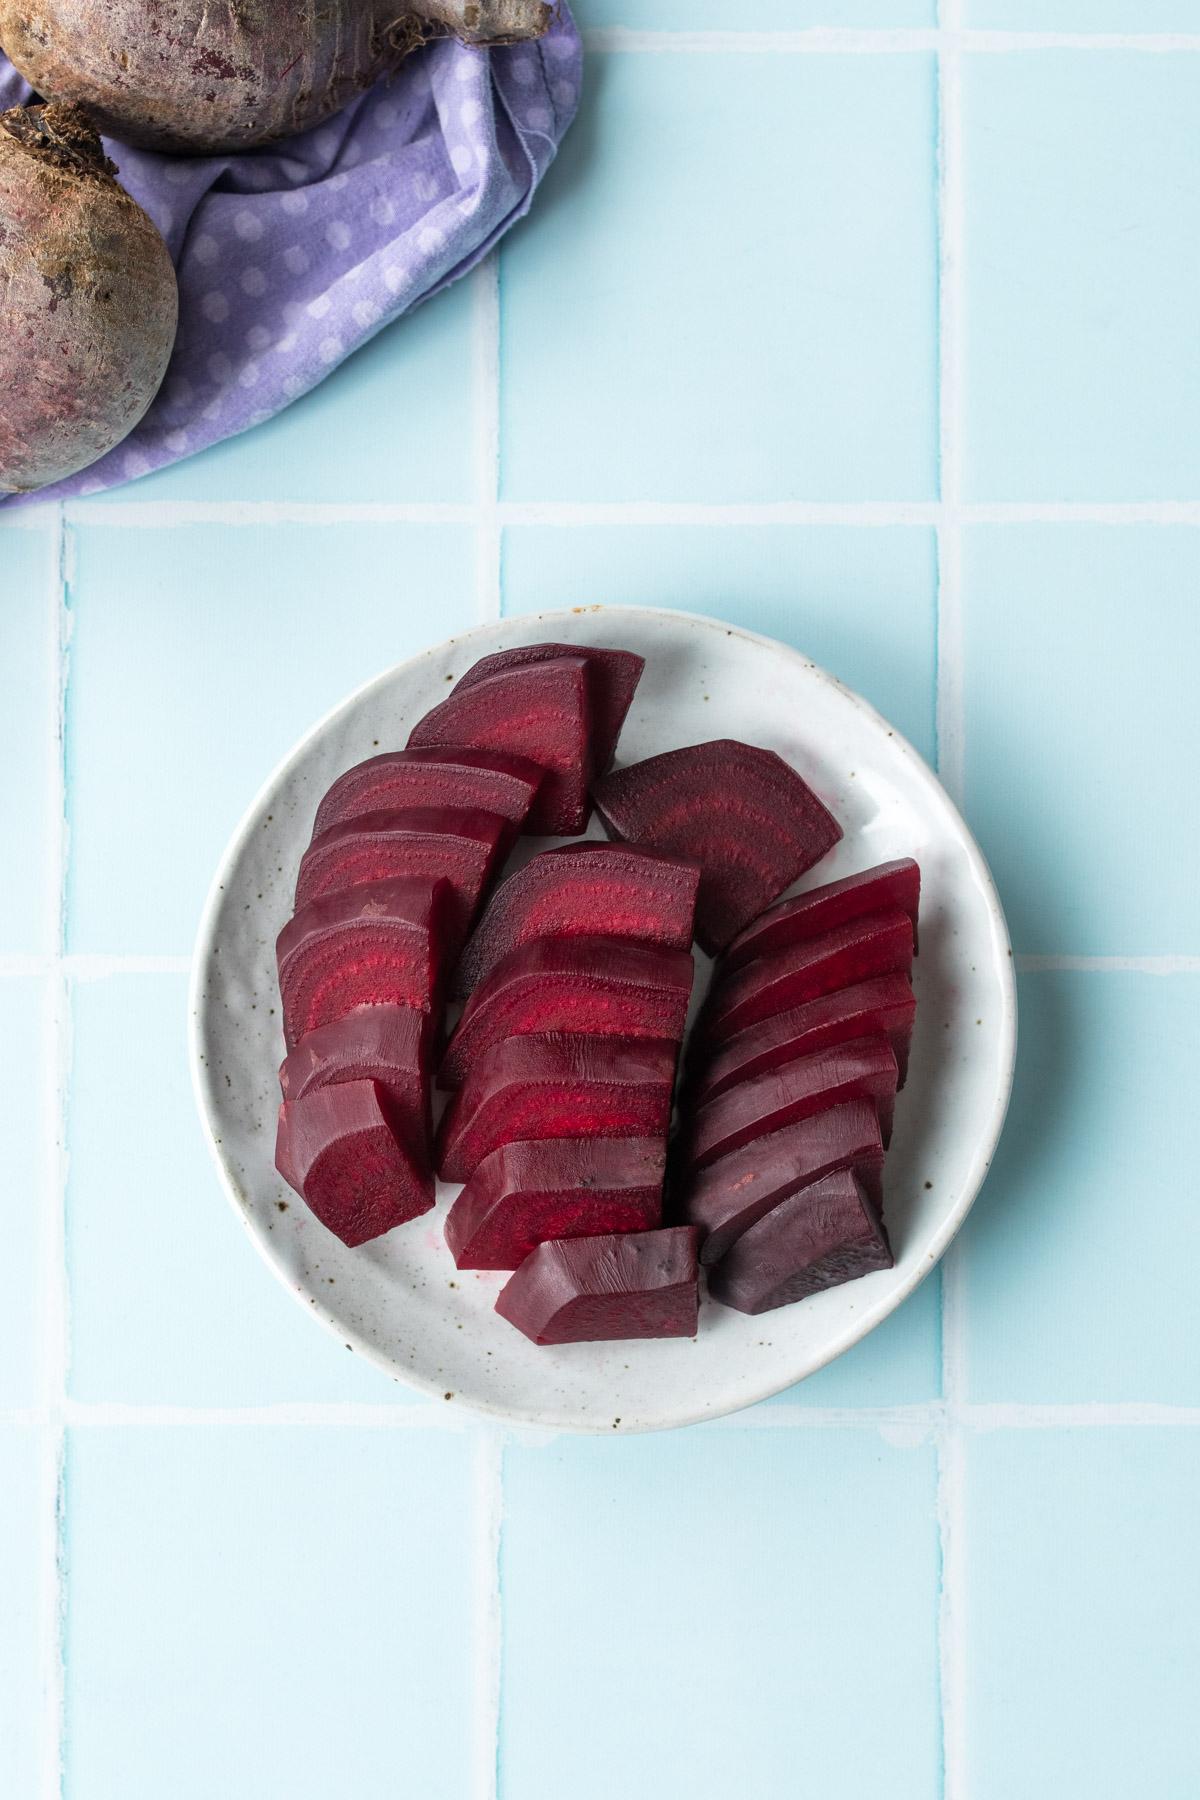 sliced beets on a plate